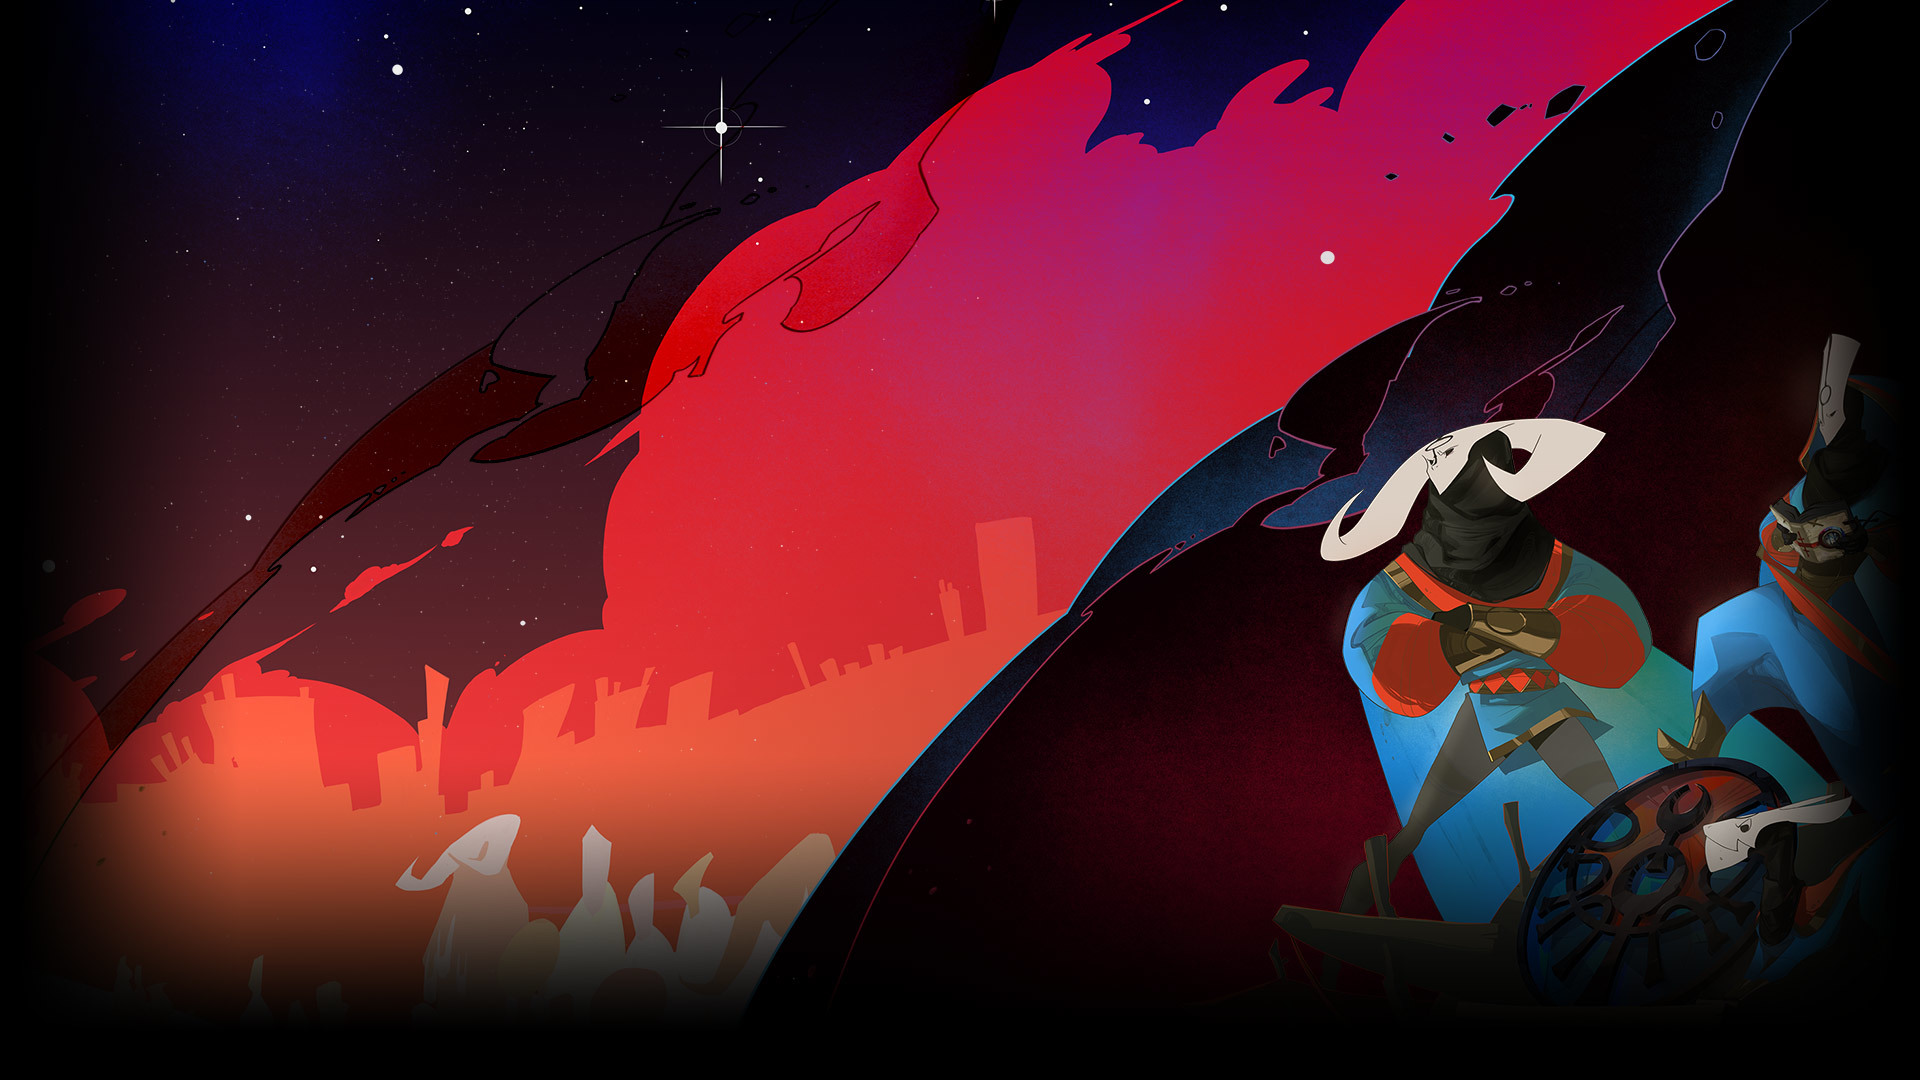 Pyre HD Wallpaper | Background Image | 1920x1080